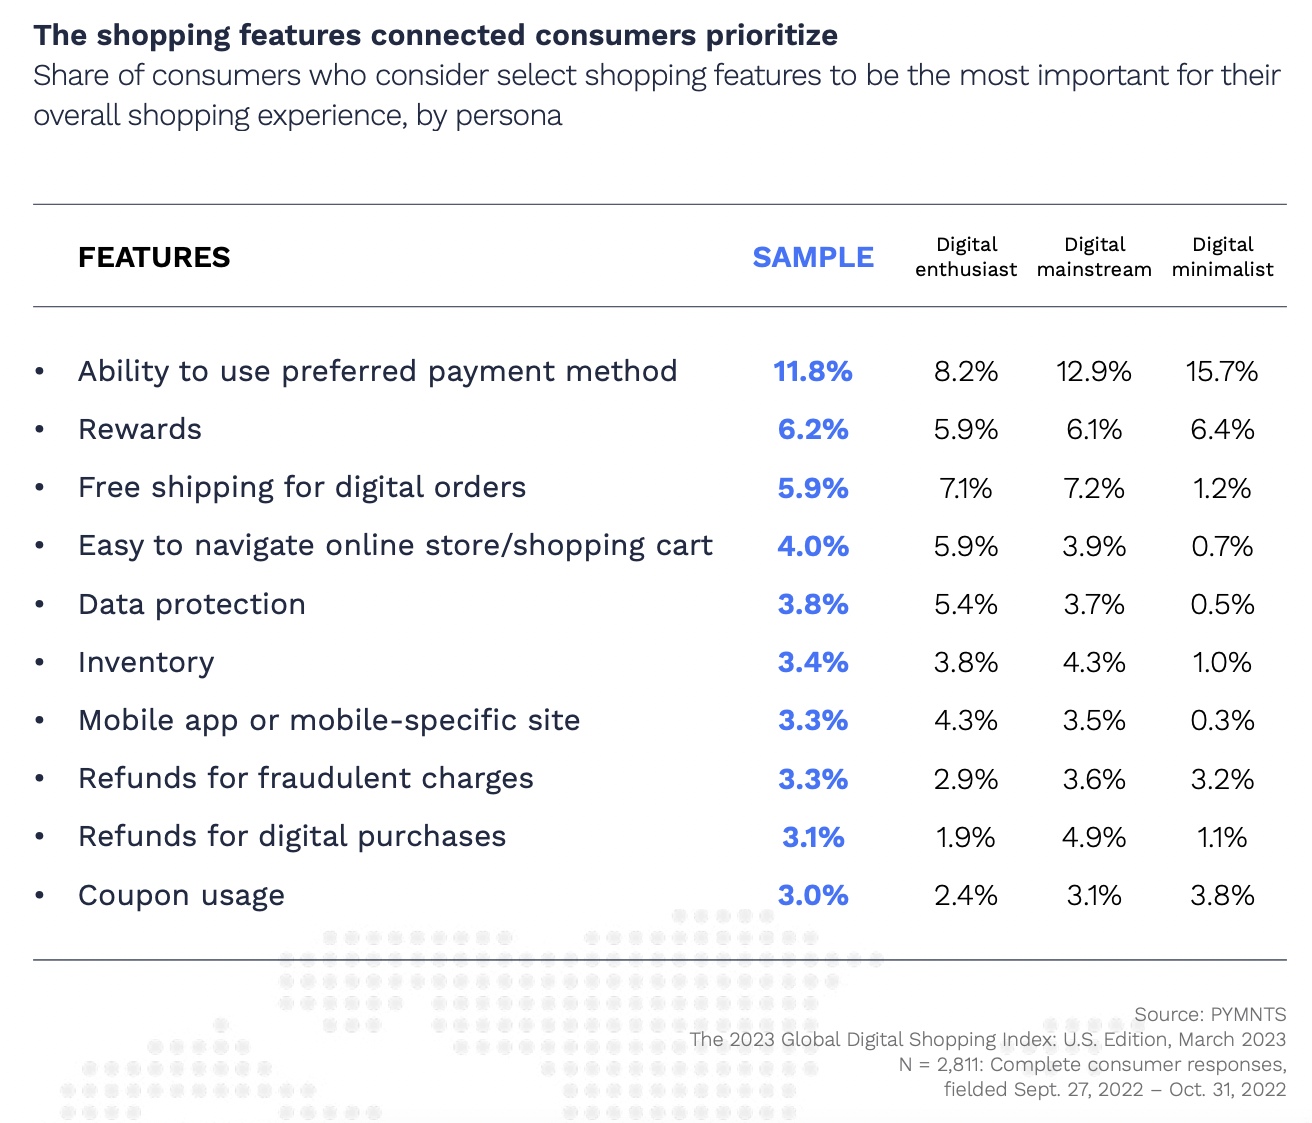 The shopping features connected consumers prioritize